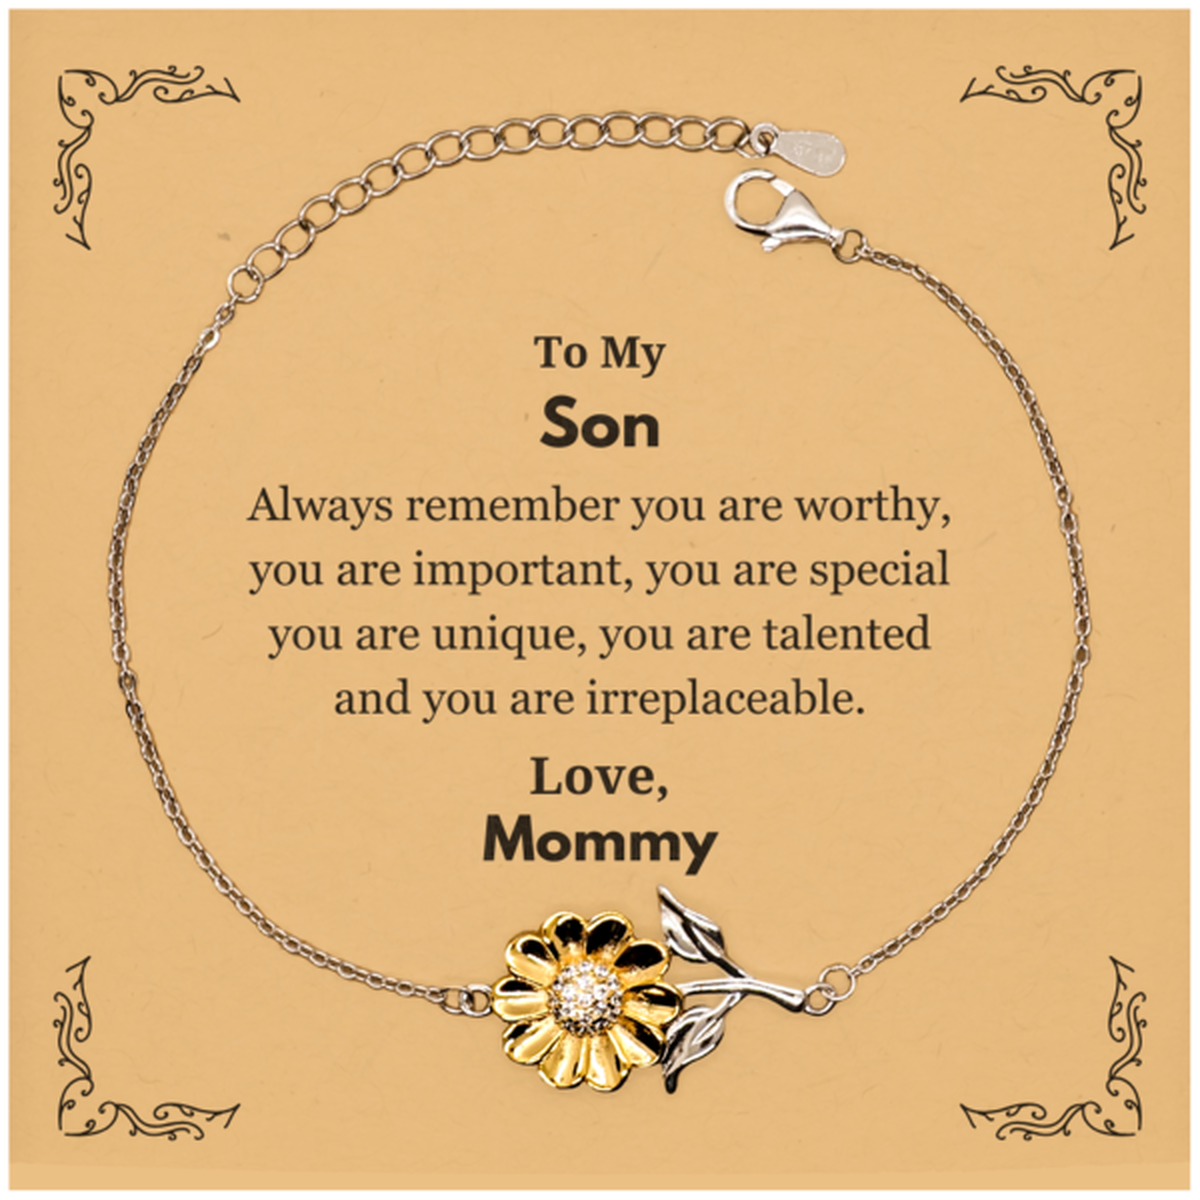 Son Birthday Gifts from Mommy, Inspirational Sunflower Bracelet for Son Christmas Graduation Gifts for Son Always remember you are worthy, you are important. Love, Mommy